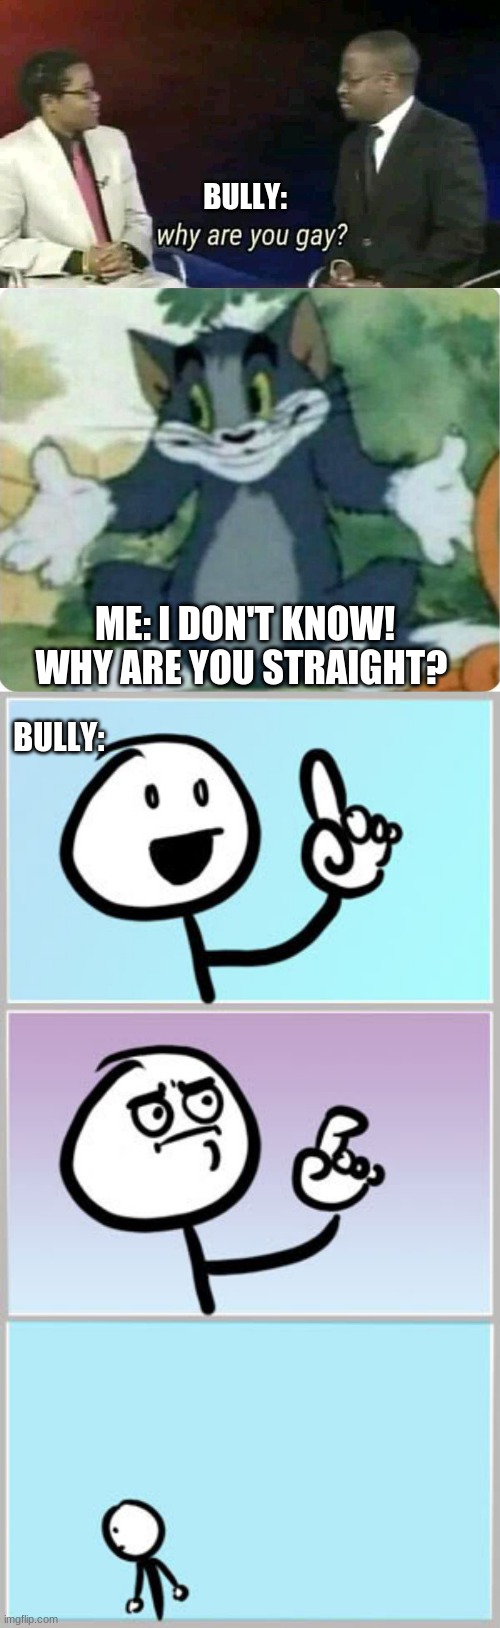 Why are you straight? | BULLY:; ME: I DON'T KNOW! WHY ARE YOU STRAIGHT? BULLY: | image tagged in well nevermind,why are you gay,tom shrugging,memes,lgbtq,pride | made w/ Imgflip meme maker